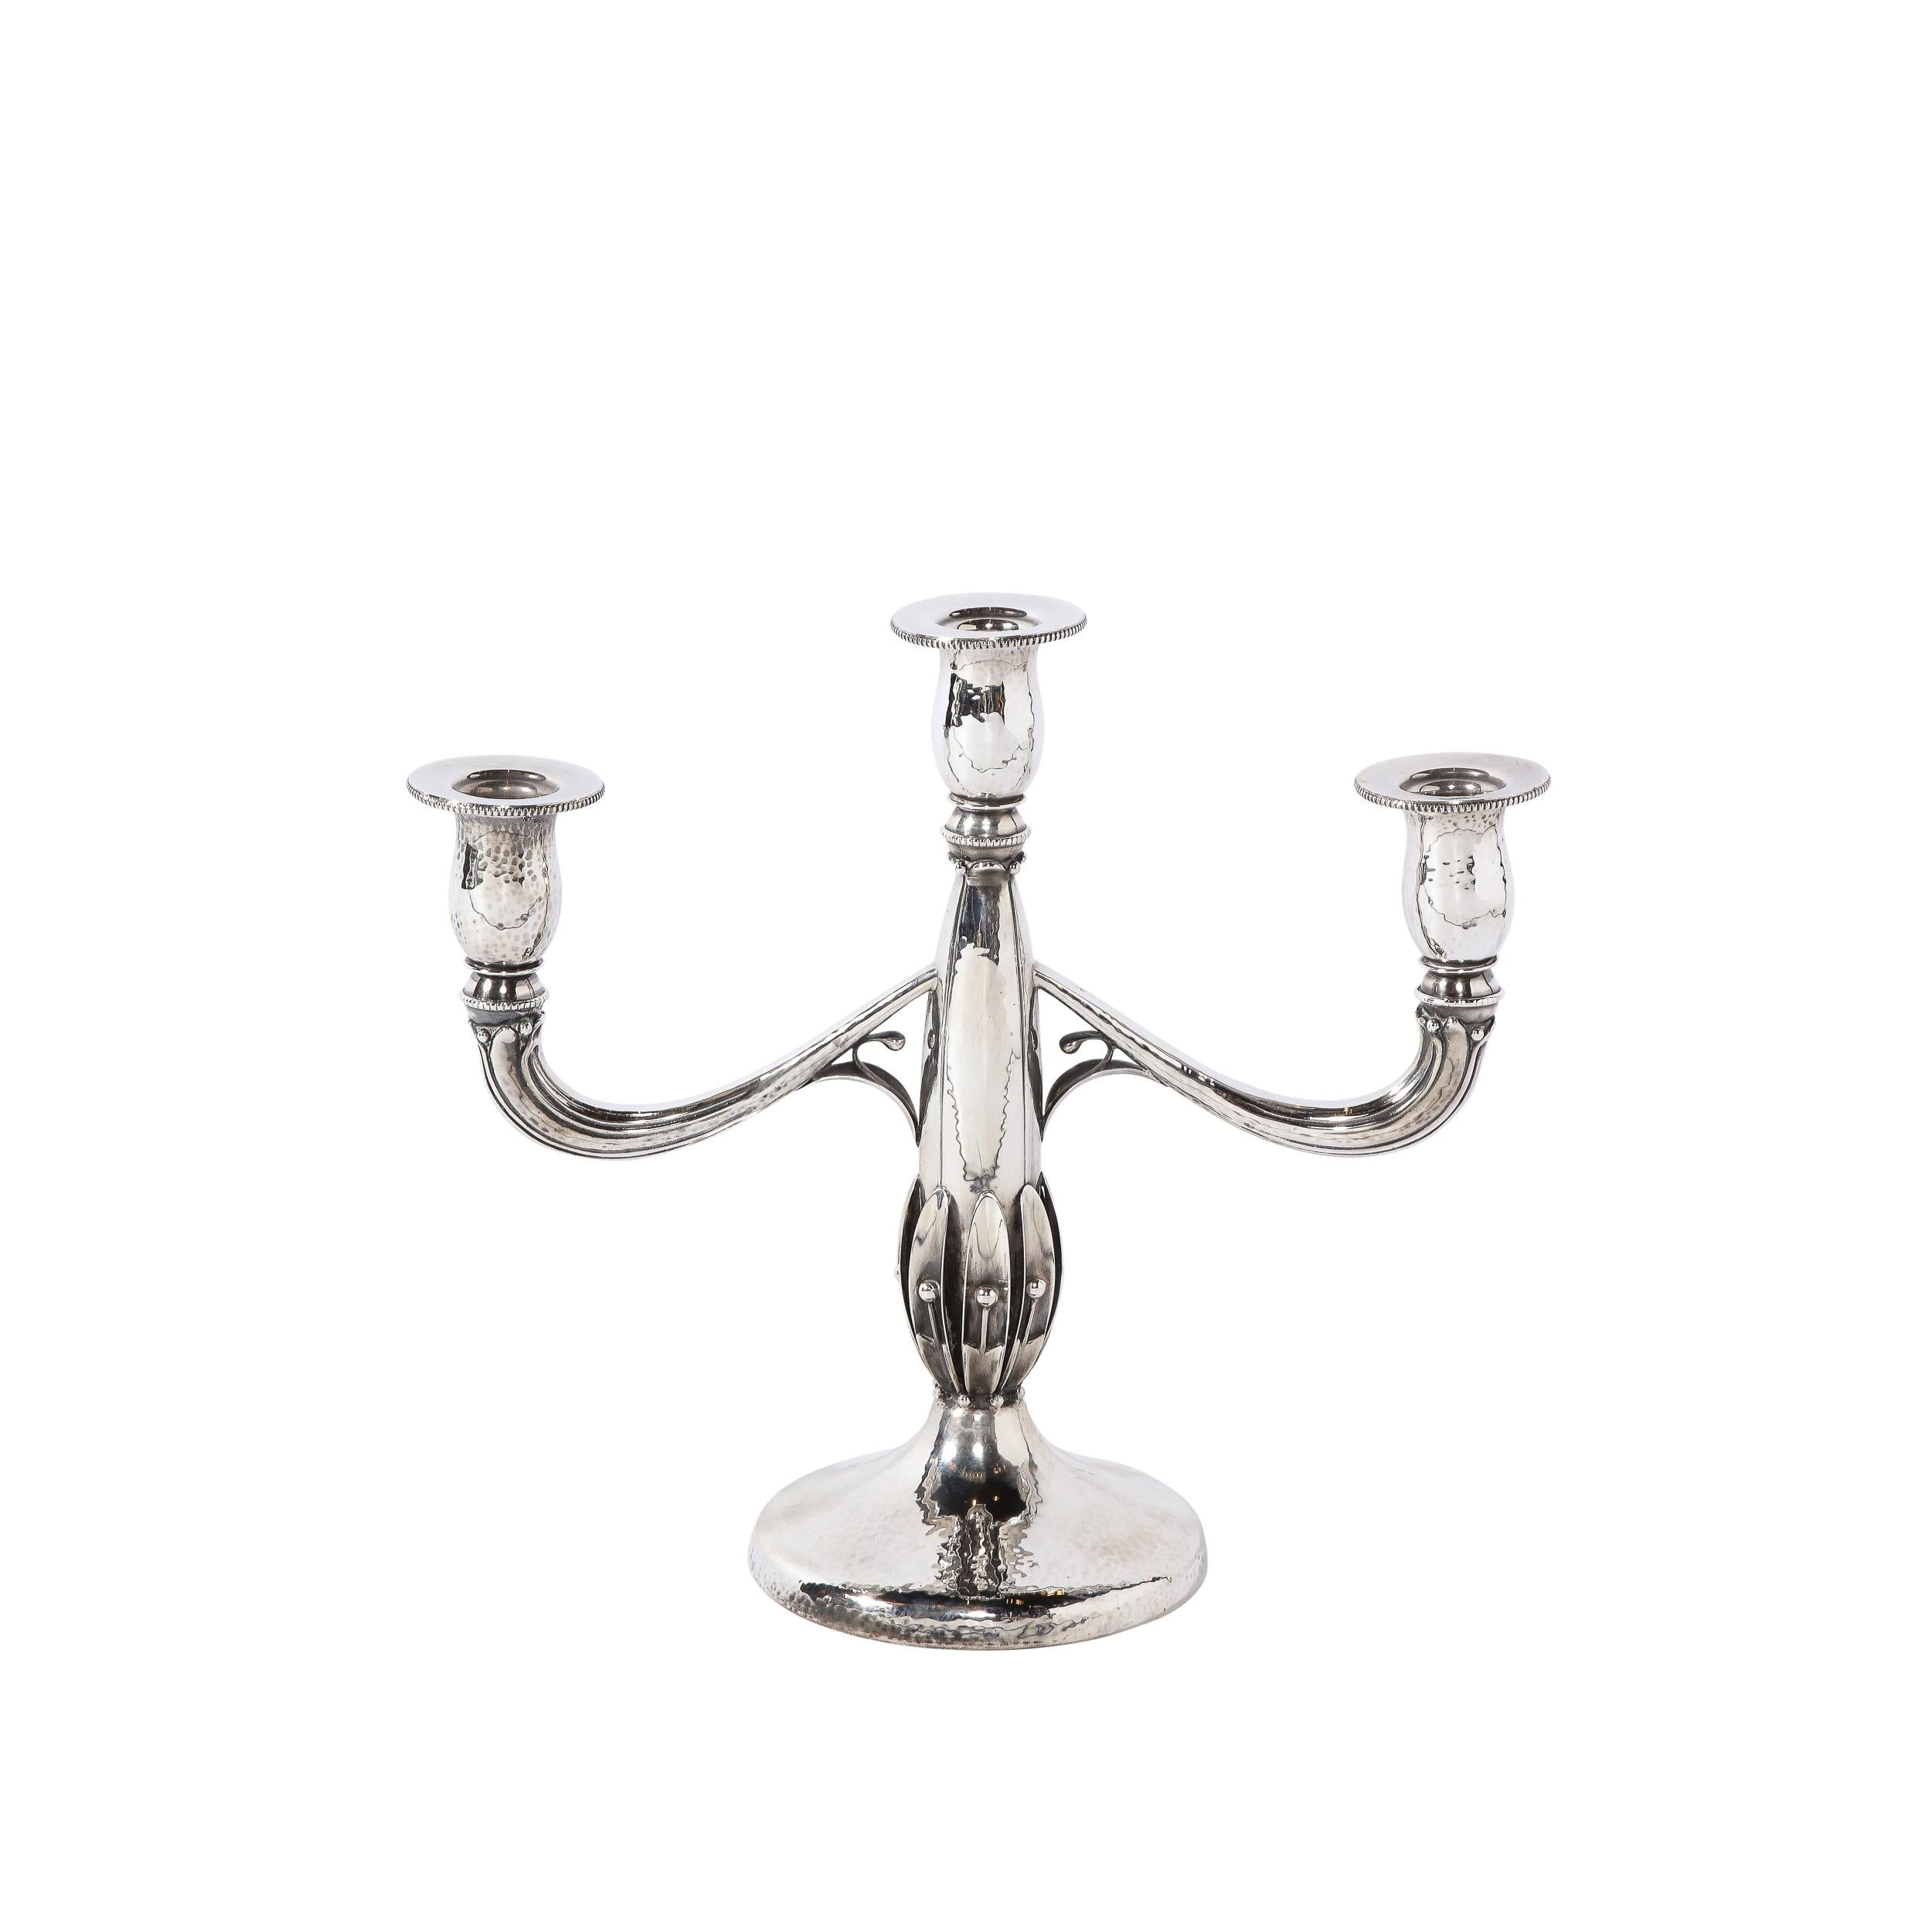 This exquisite pair of Art Deco sterling silver candelabras was realized in the United States circa 1930. They feature convex circular hand hammered bases with a dappled texture that ascend into a subtly conical bodies. The protuberant base of the